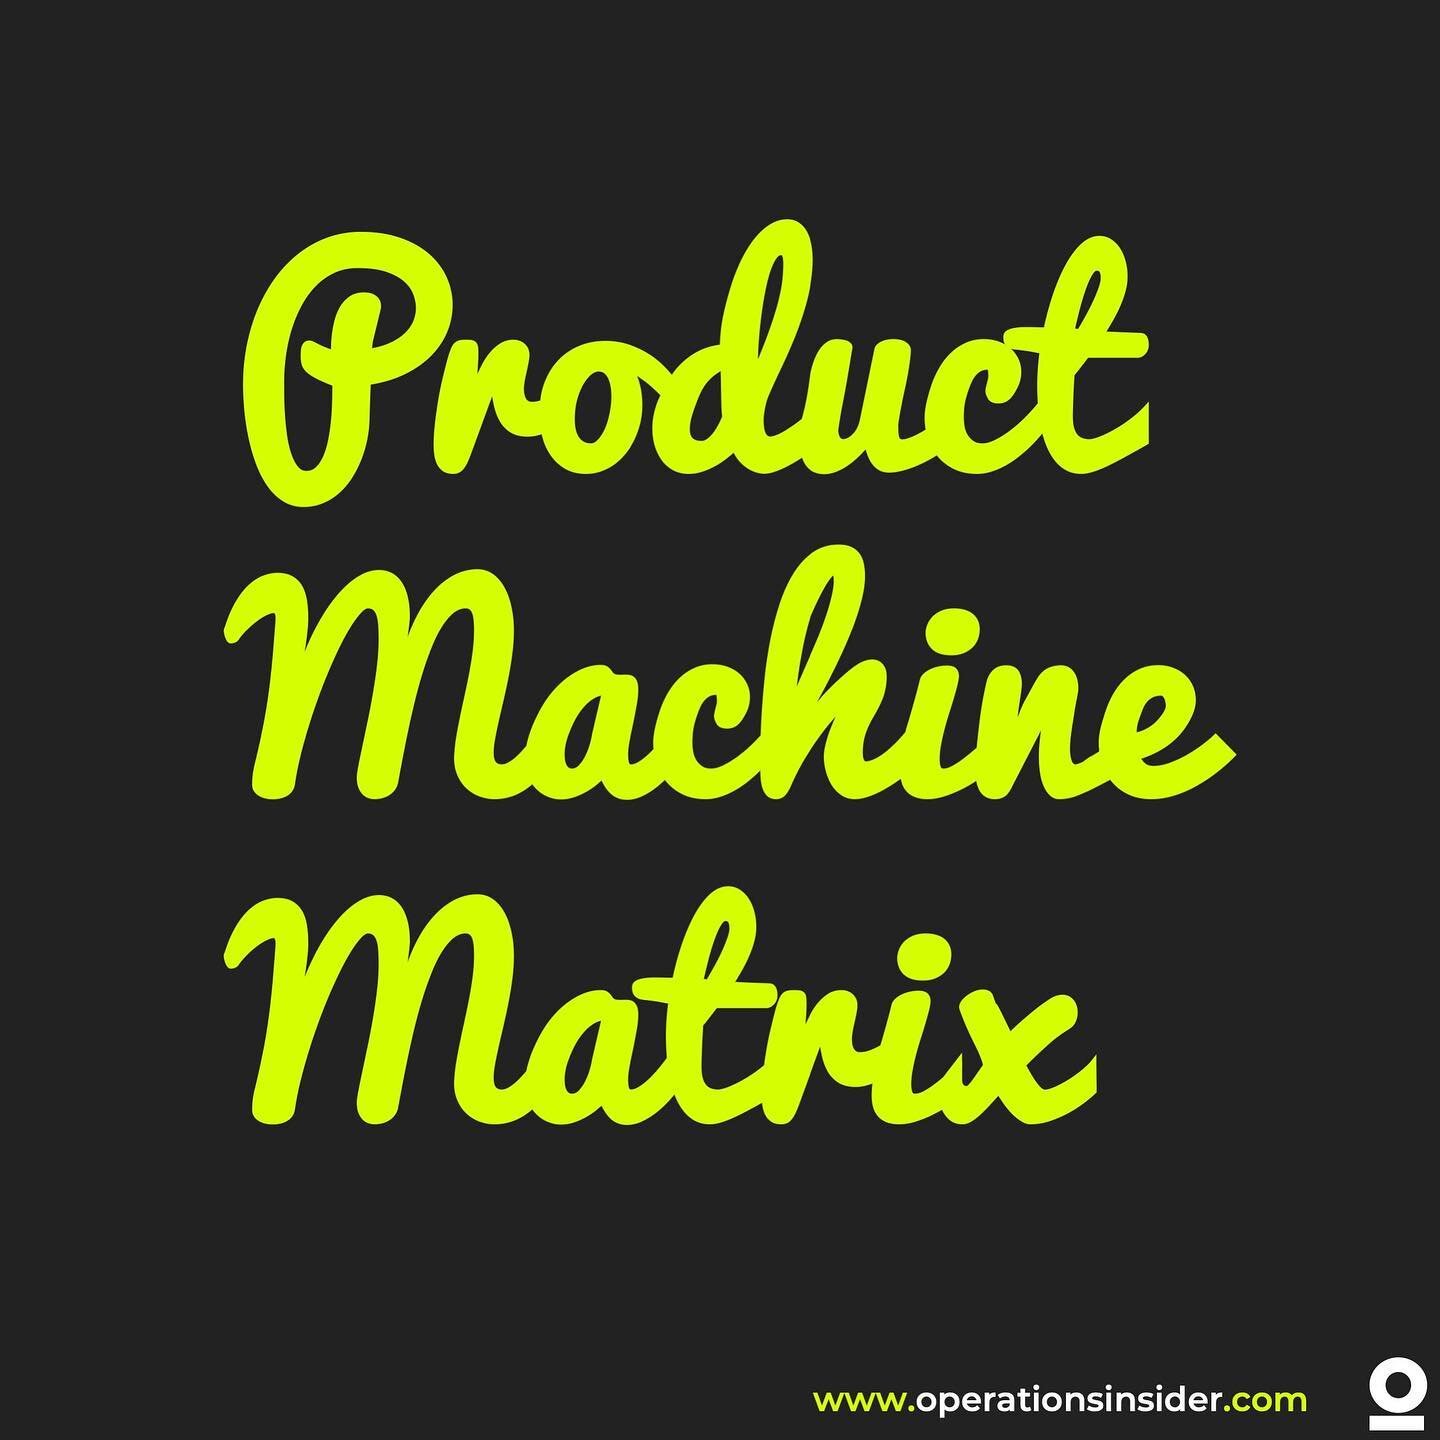 🔧📊 Navigating Production with the Product-Machine Matrix! 📊🔧
The &quot;Product-Machine Matrix&quot; is an invaluable tool in the world of operations management. By plotting products against machines, this matrix helps organizations visualize thei